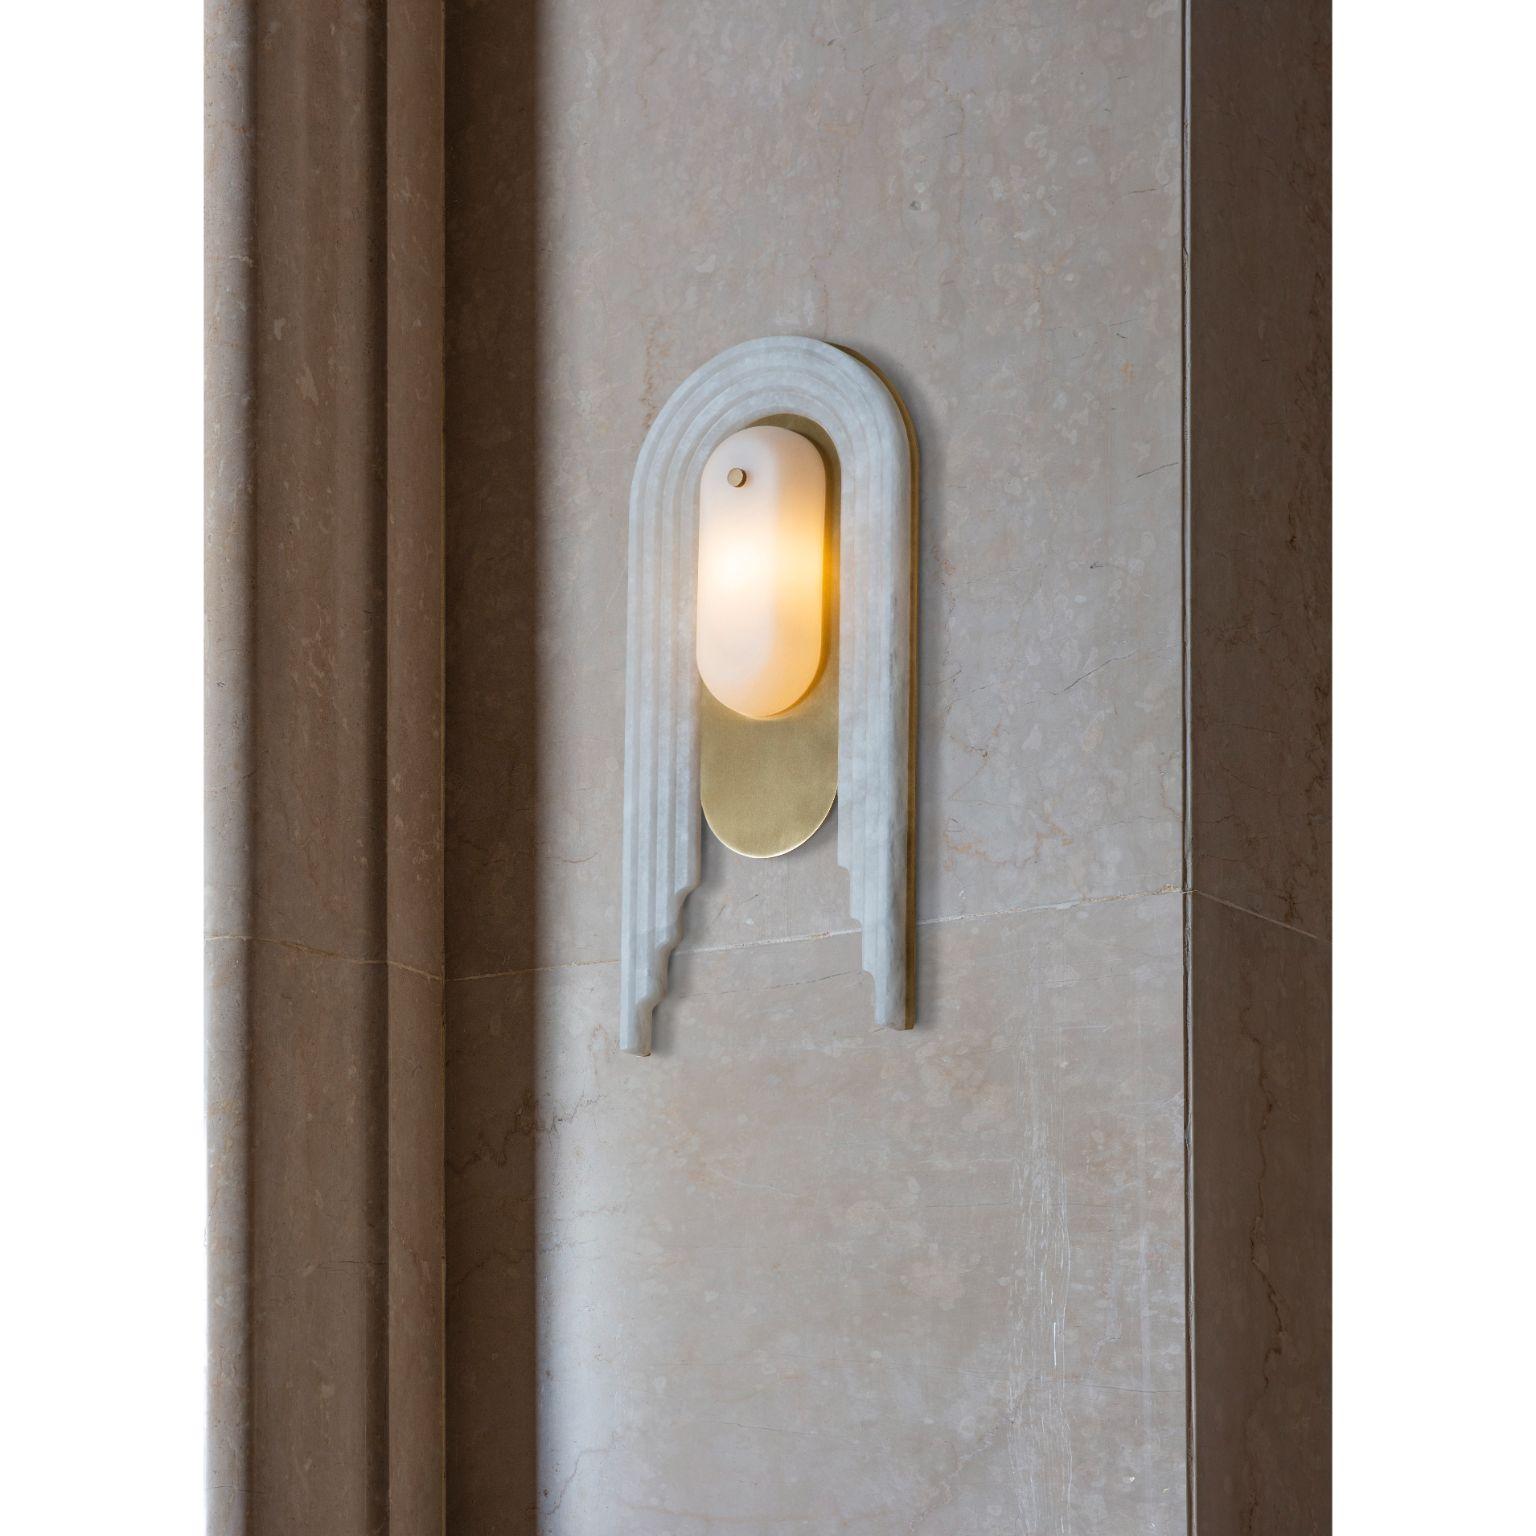 Vima wall light by Bert Frank
Dimensions: D17.6 x W4.7 x H39.2 cm
Materials: Brass, Alabaster, Glass

Finishes: Brushed brass lacquered as standard, Alabaster facade
IP rating, IP20 rated, suitable for outside wet area zones
Light source. 1x